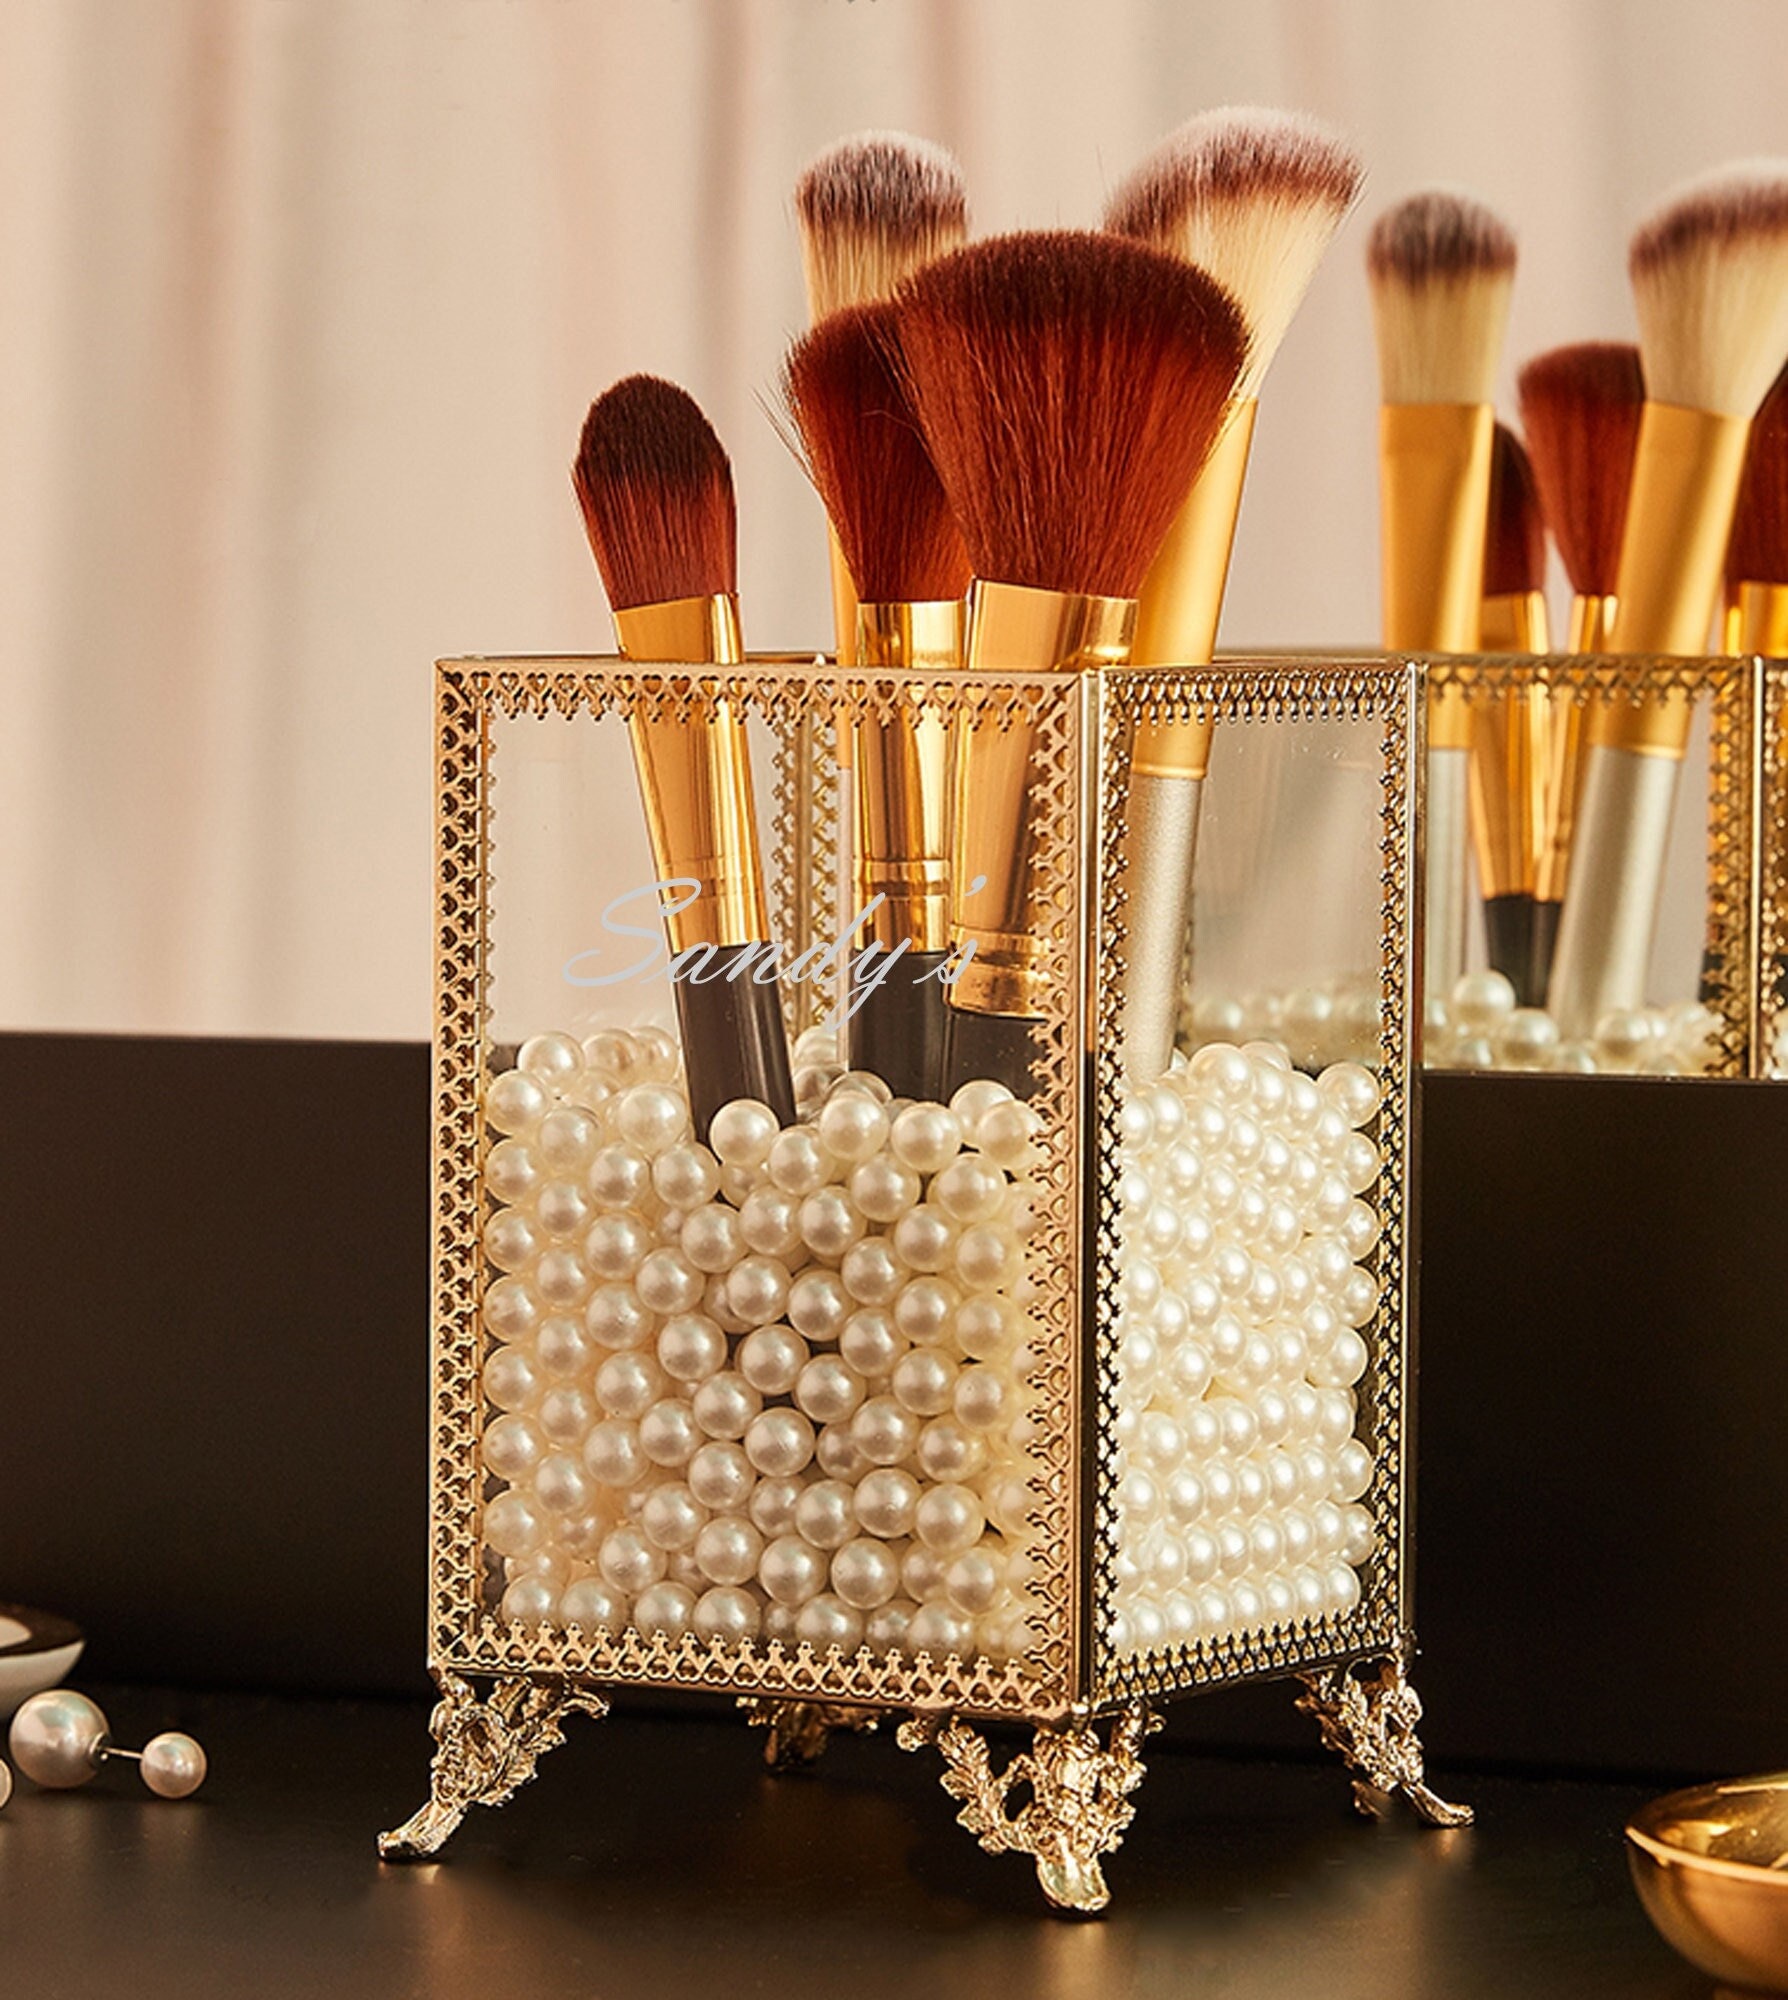 25 Of The Best DIY Makeup Organizers To Tidy Up And Style Your Space